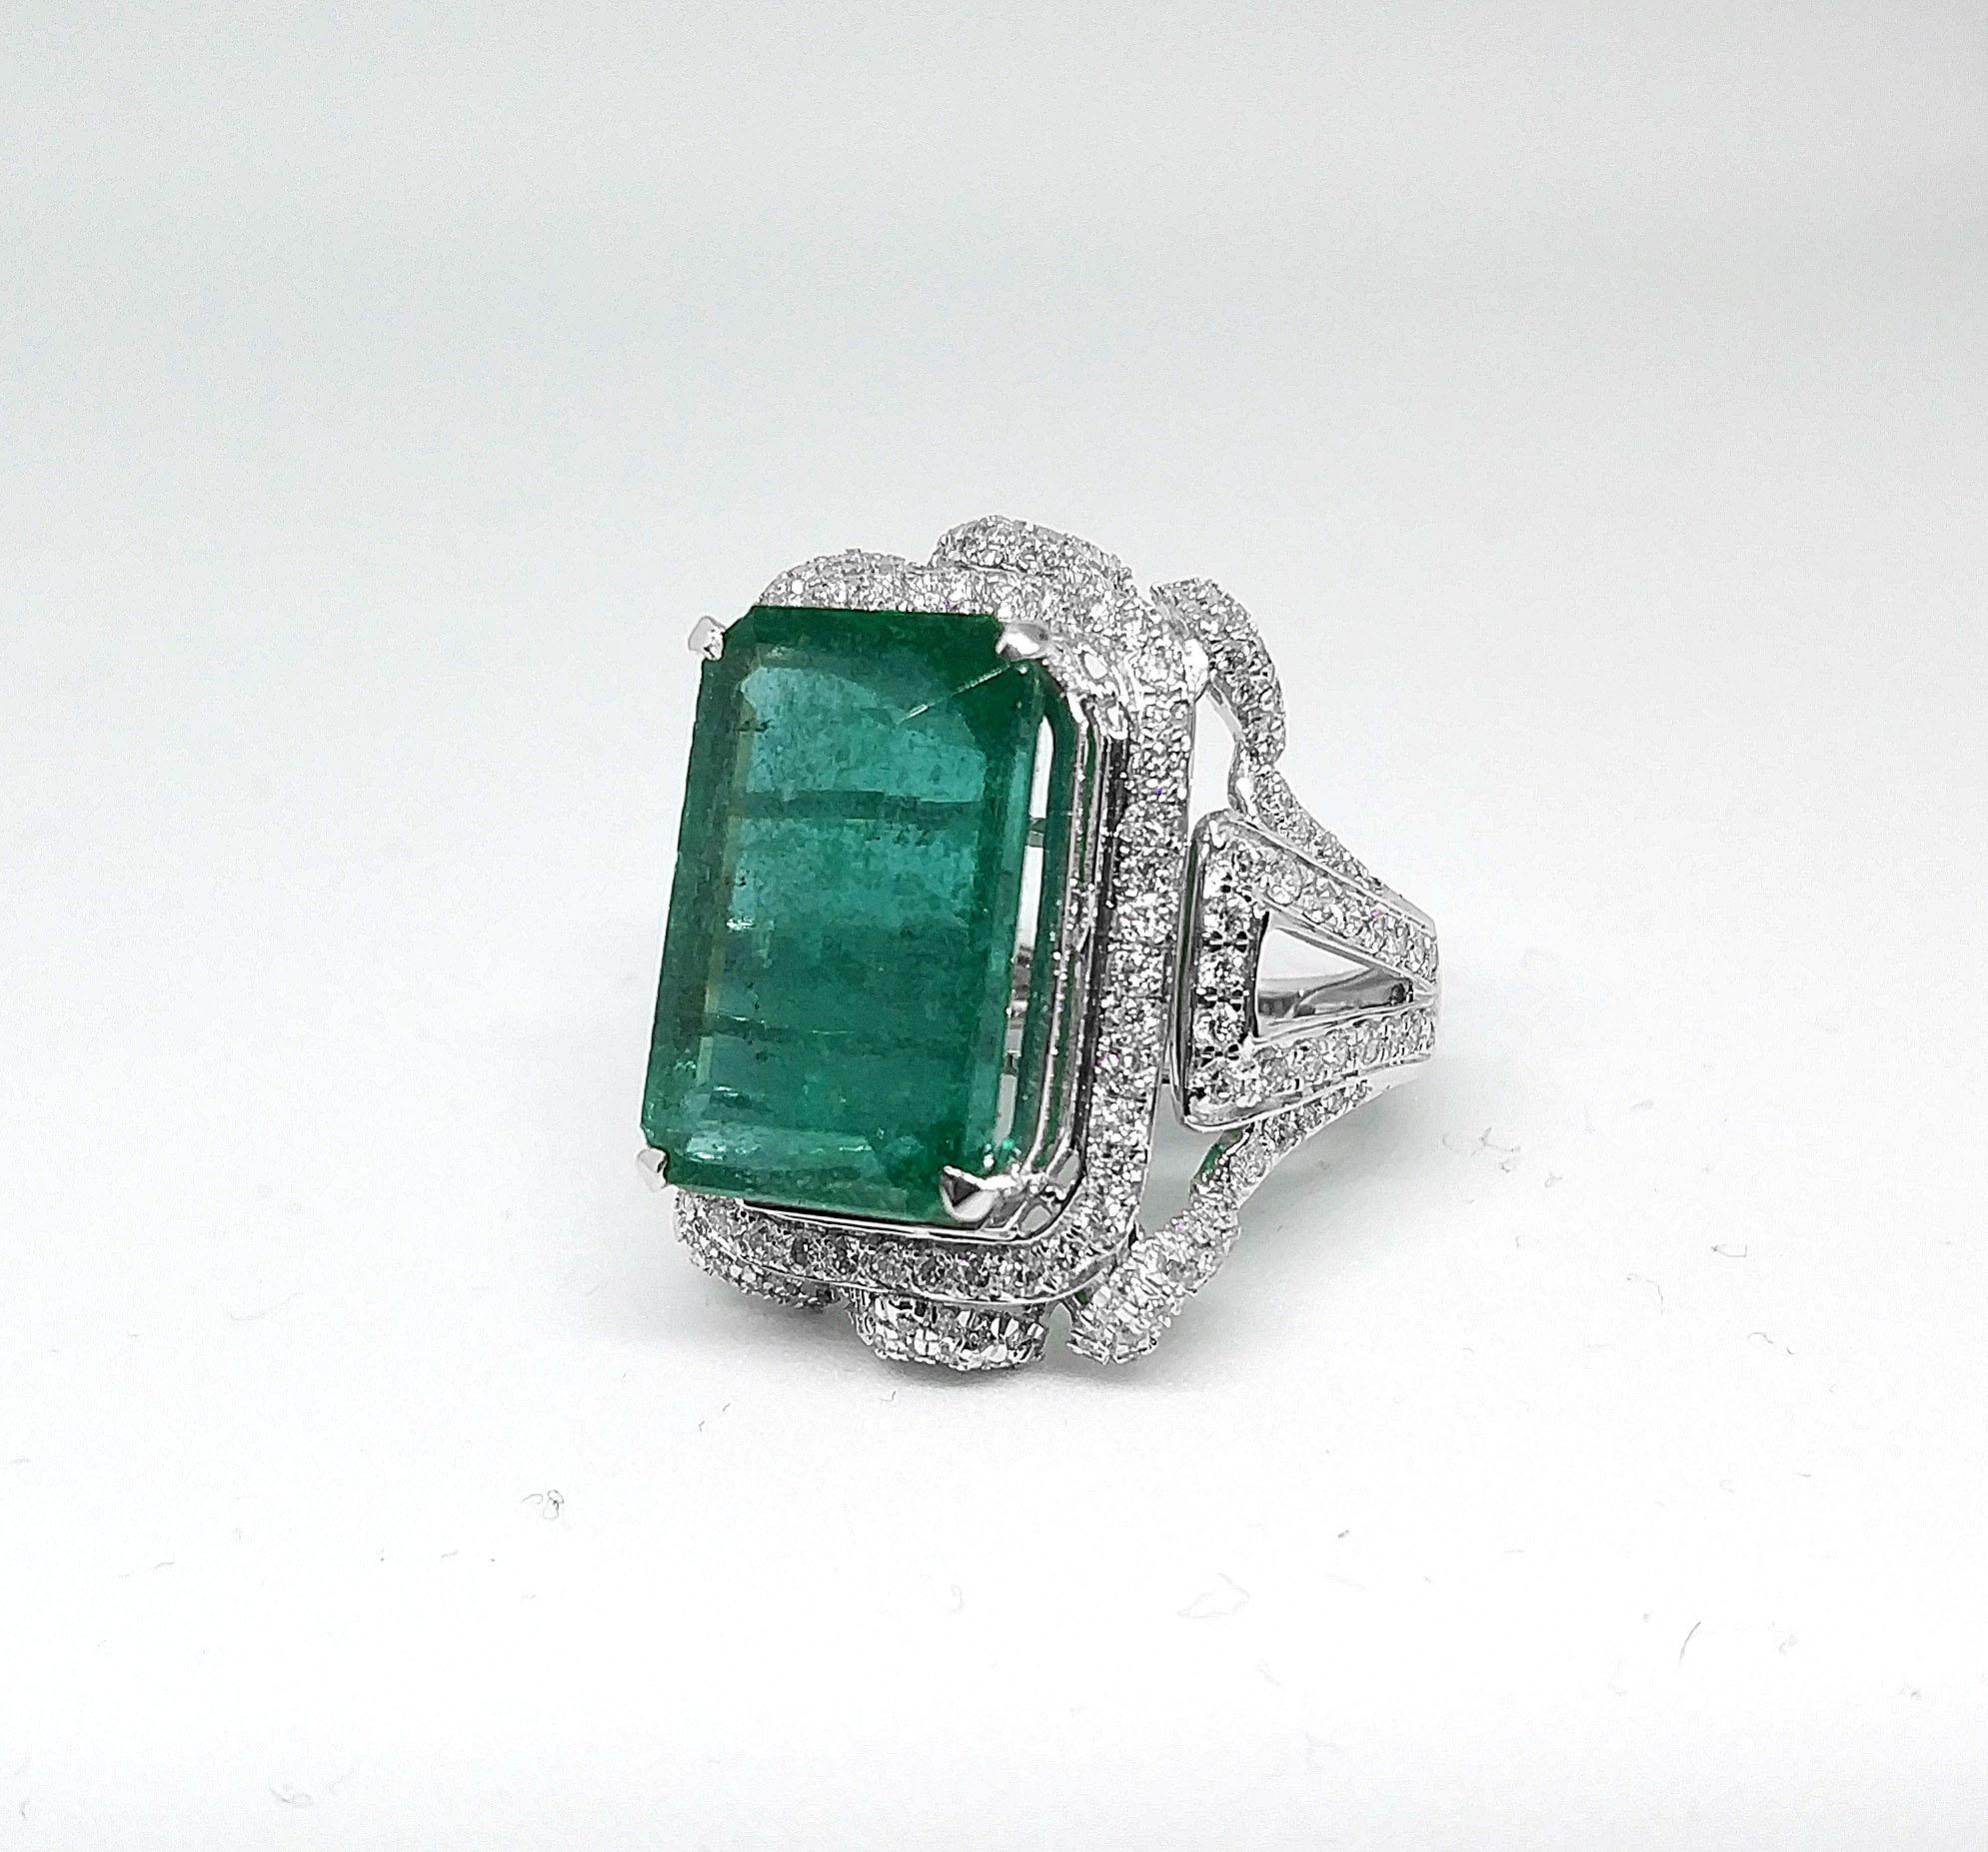 11.76 carat certified emerald and
1.43 carat diamond
Art Deco ring in 18 carat white gold
Resizable